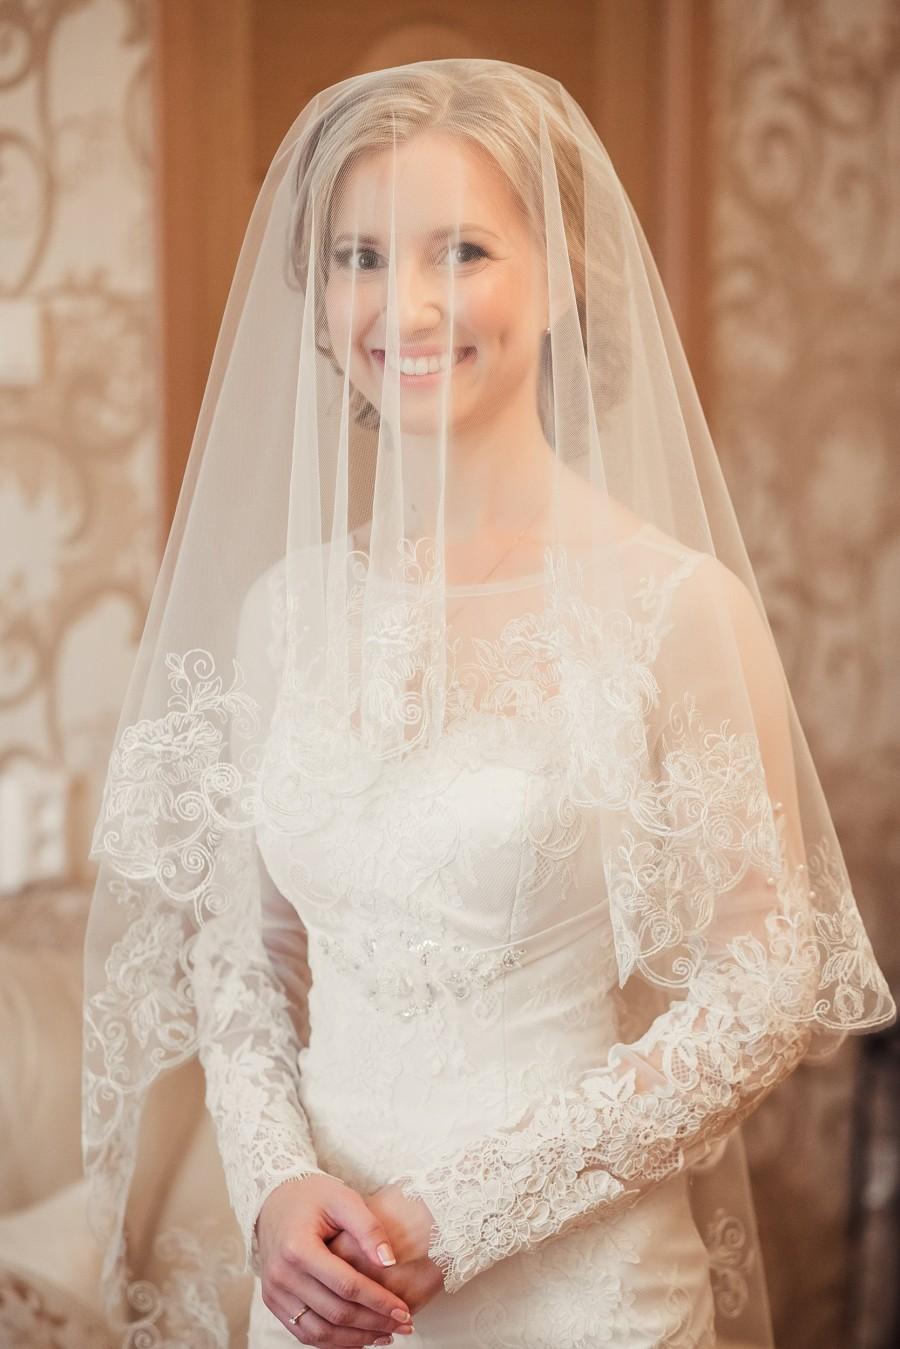 Hochzeit - Wedding veil with flowers, 2 tier veil with embroidery, Lace veil with comb, Long veil, Fingertip veil, Chapel veil, Cathedral veil